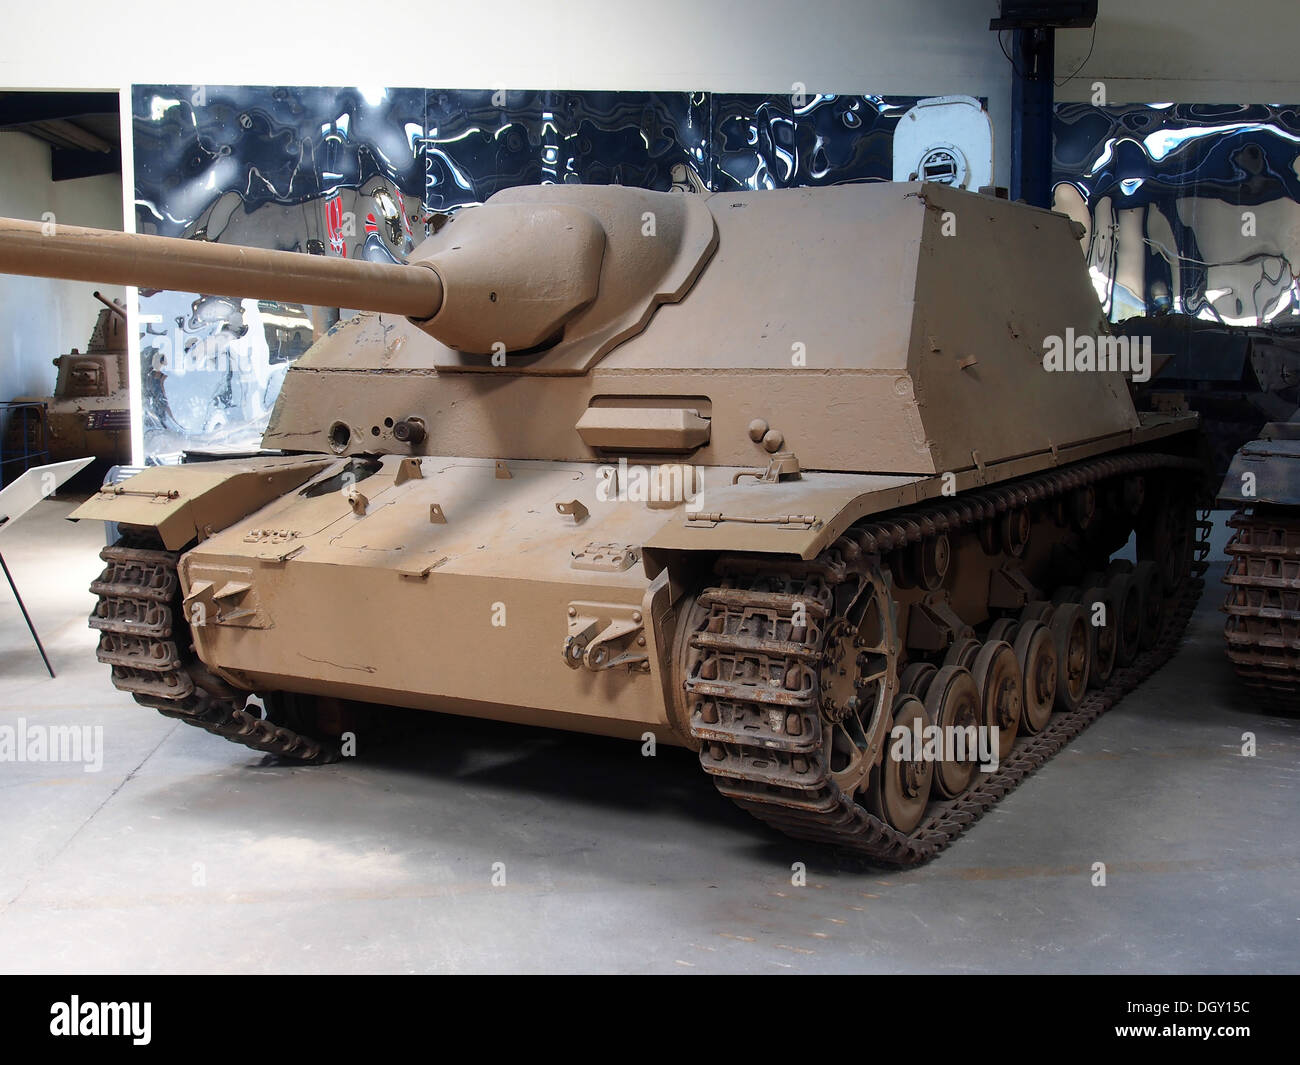 Sd.Kfz. 162-1 Jagdpanzer IV-70(A) in the tank museum, Saumur, France, pic-4 Sd.Kfz. 162/1 Jagdpanzer IV/70(A) Stock Photo